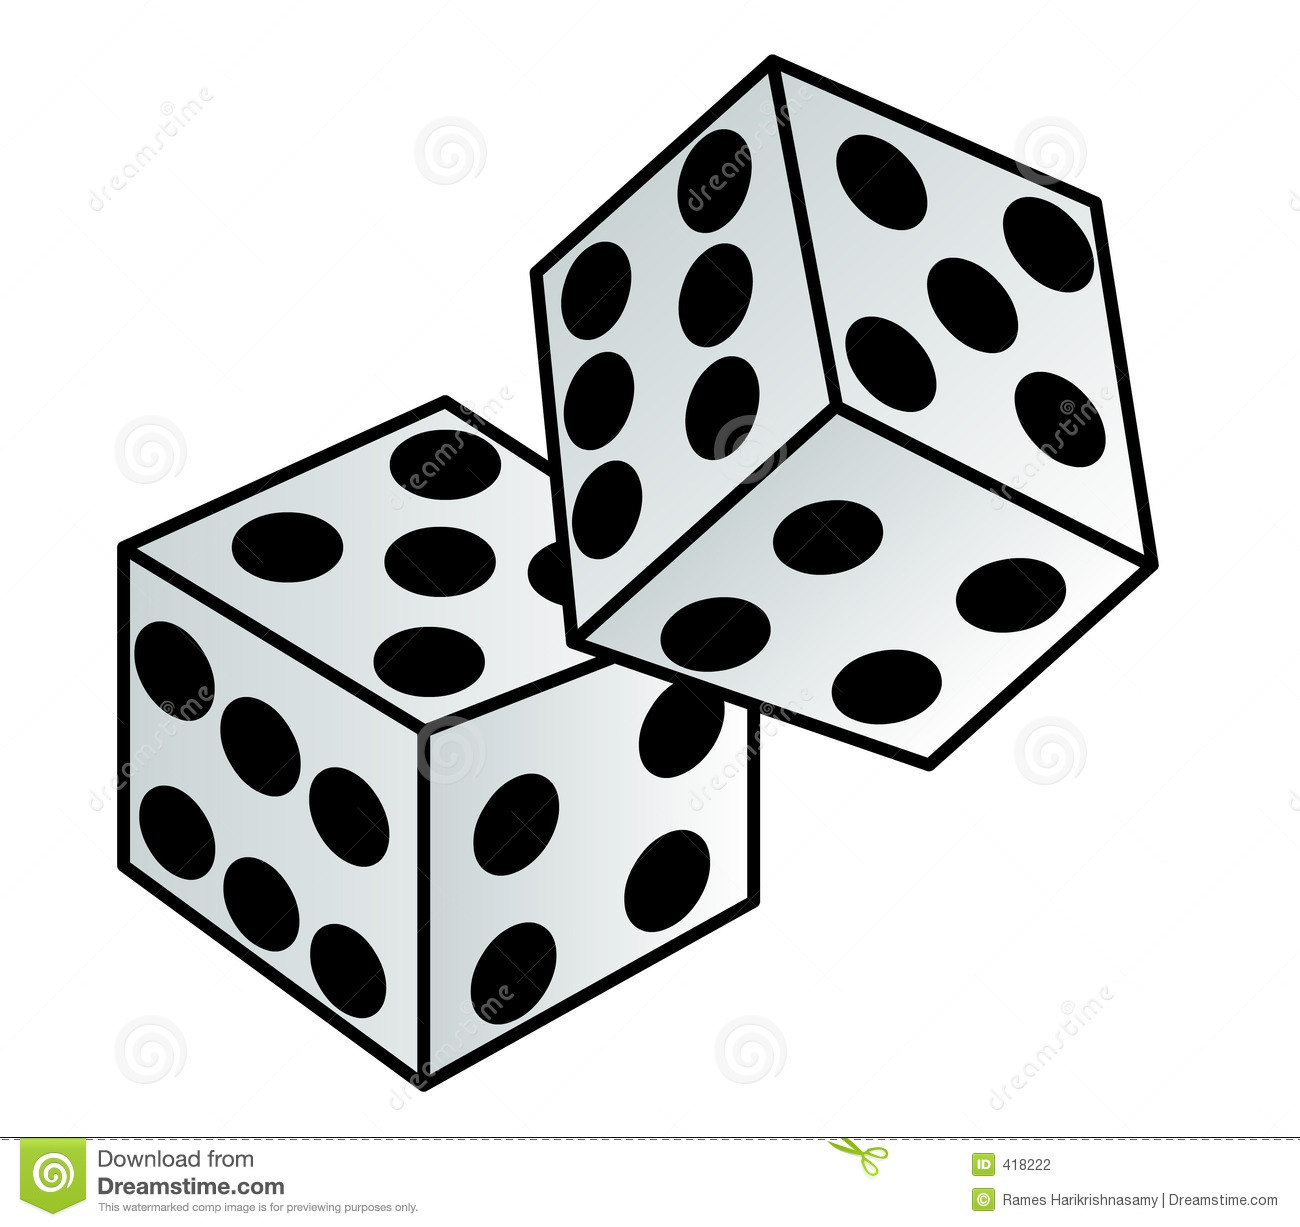 Vector   Dice Stock Photography   Image  418222